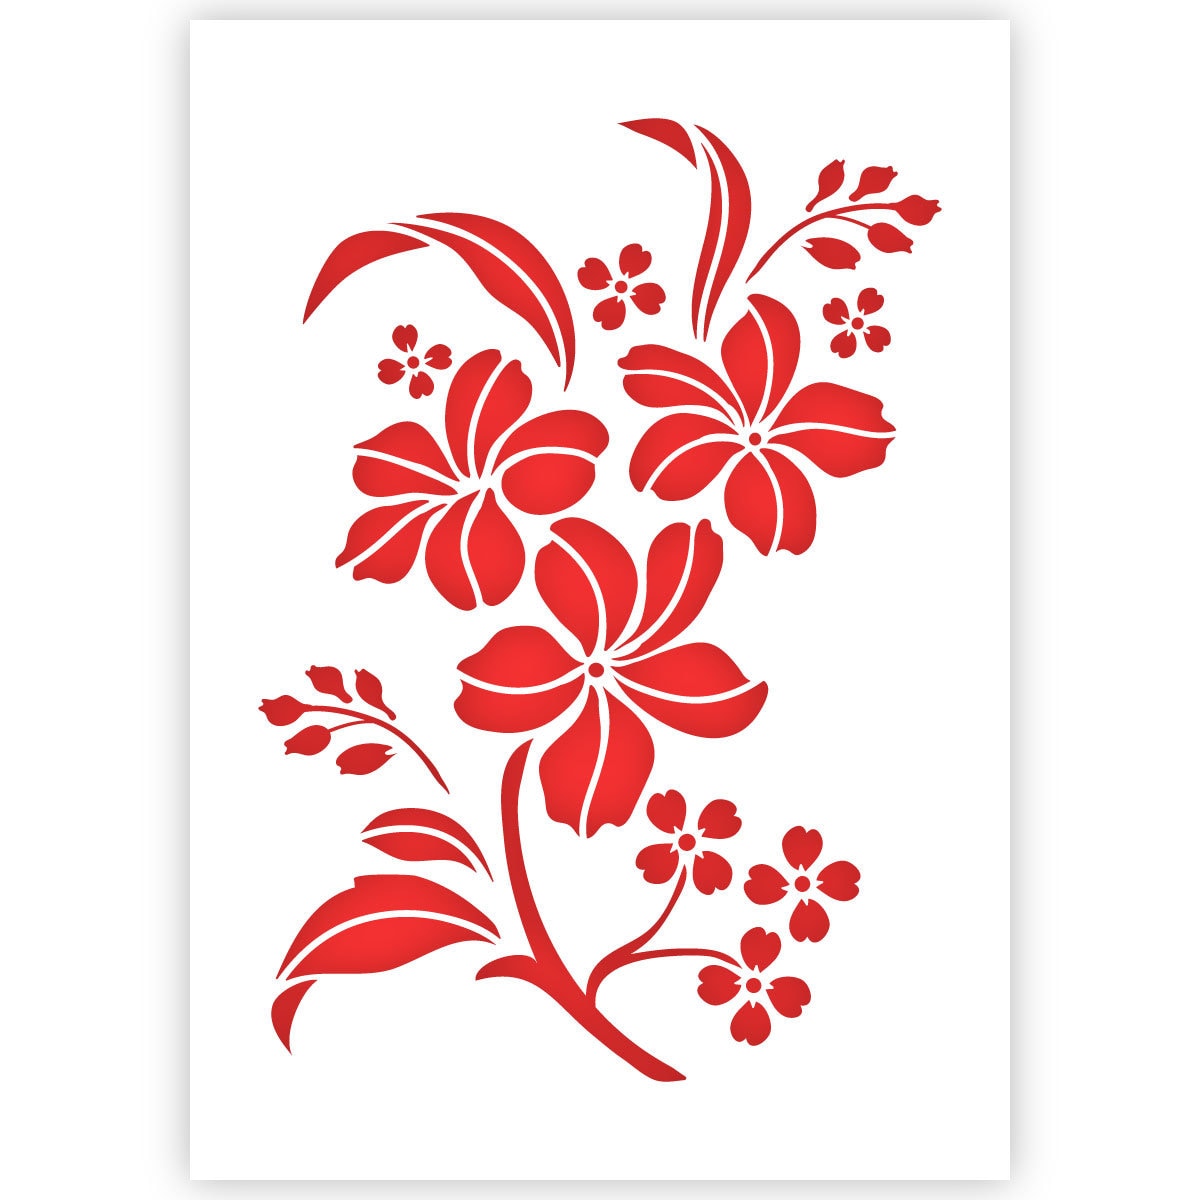 Flower Stencil Stock Photos - 101,737 Images